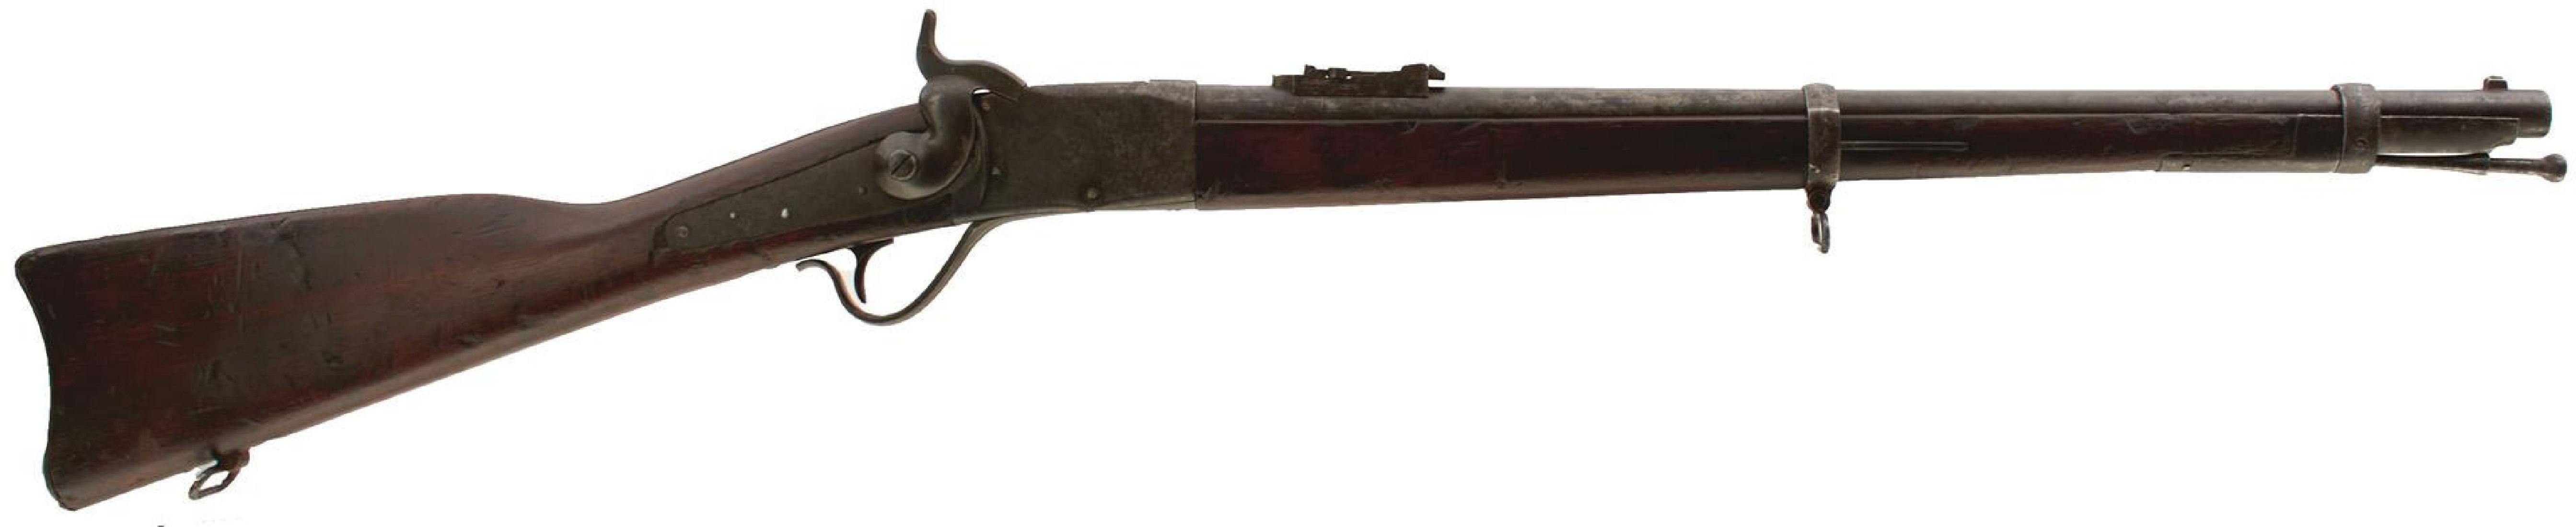 A SCARCE .43 OBSOLETE CALIBRE PEABODY CARBINE, 22.5inch sighted barrel fitted with ramp and ladder